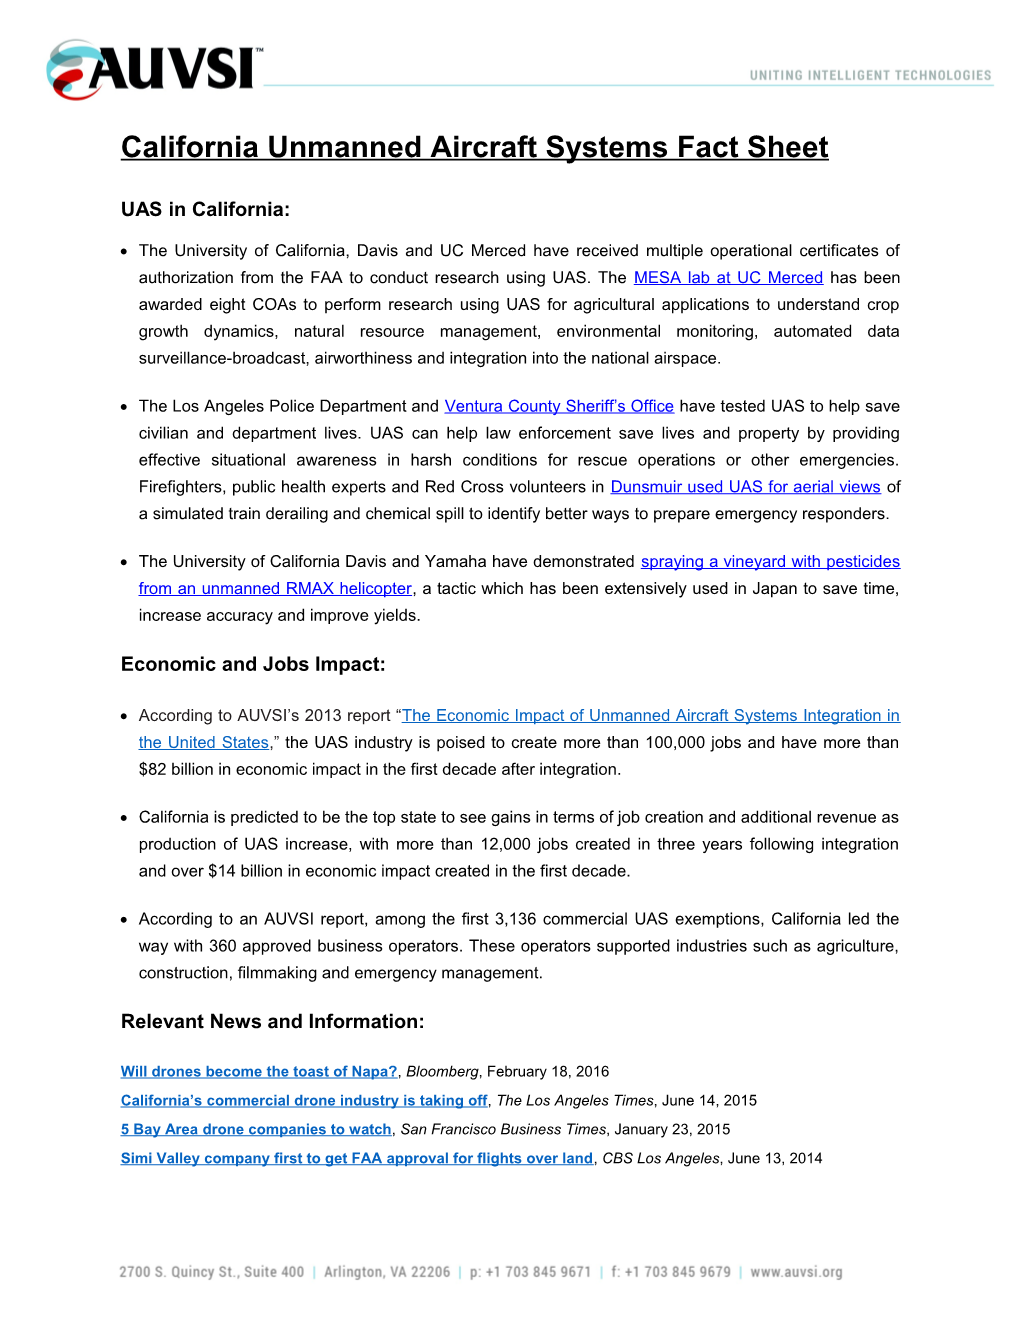 California Unmanned Aircraft Systems Fact Sheet